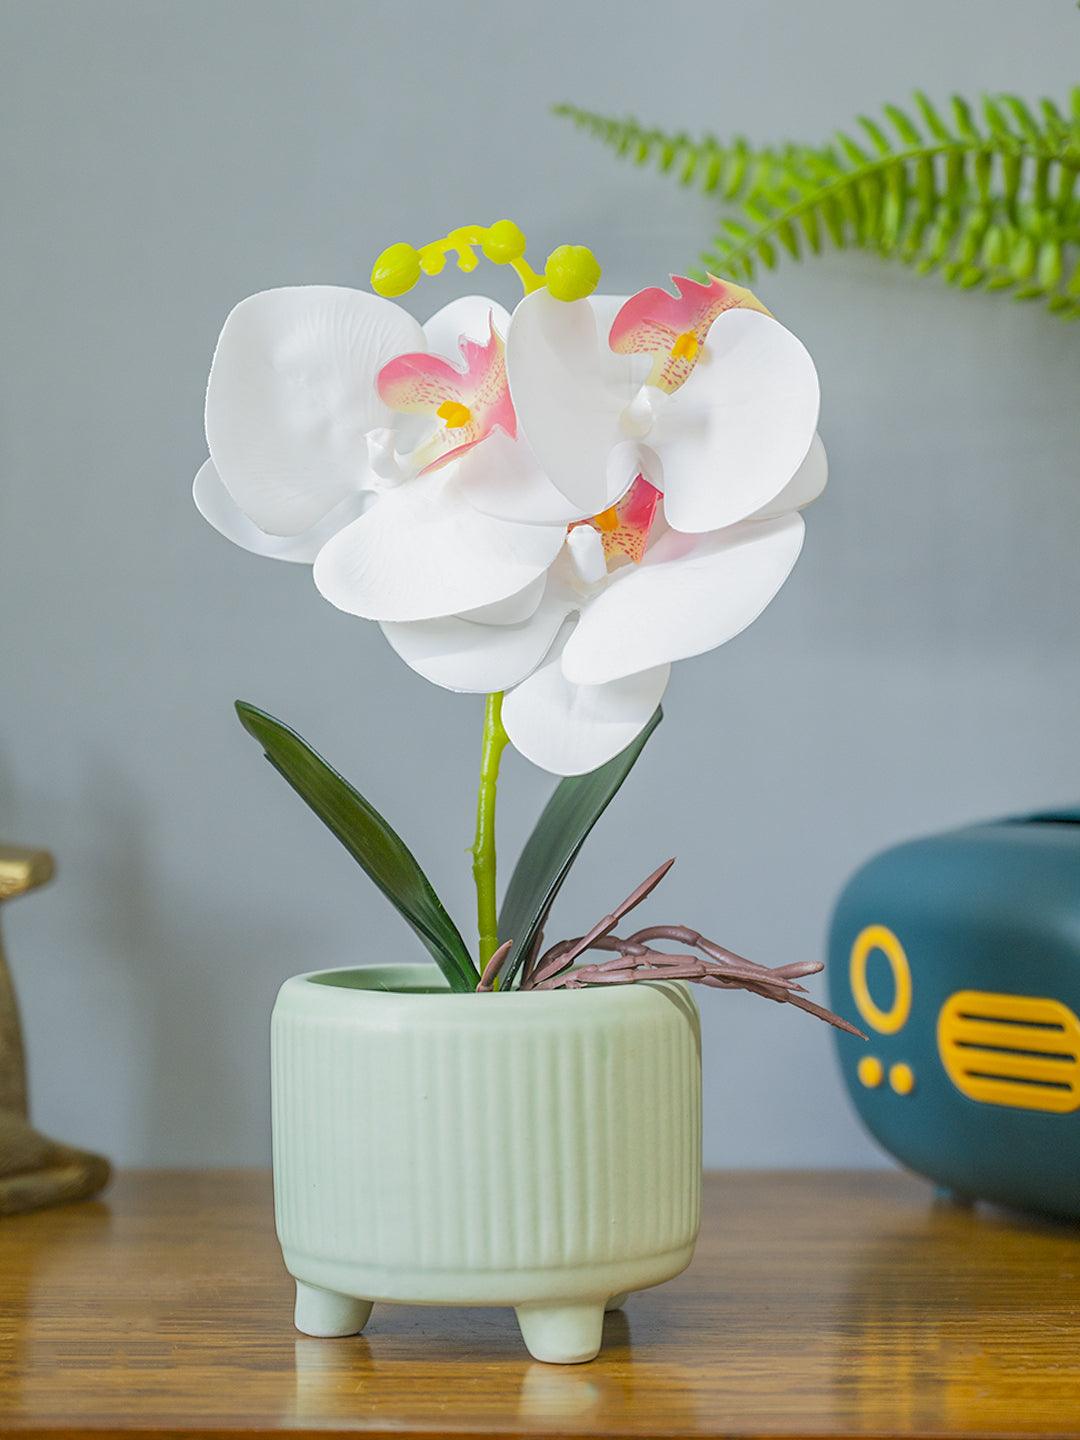 White Orchid Flowers With White Tumbler Pot